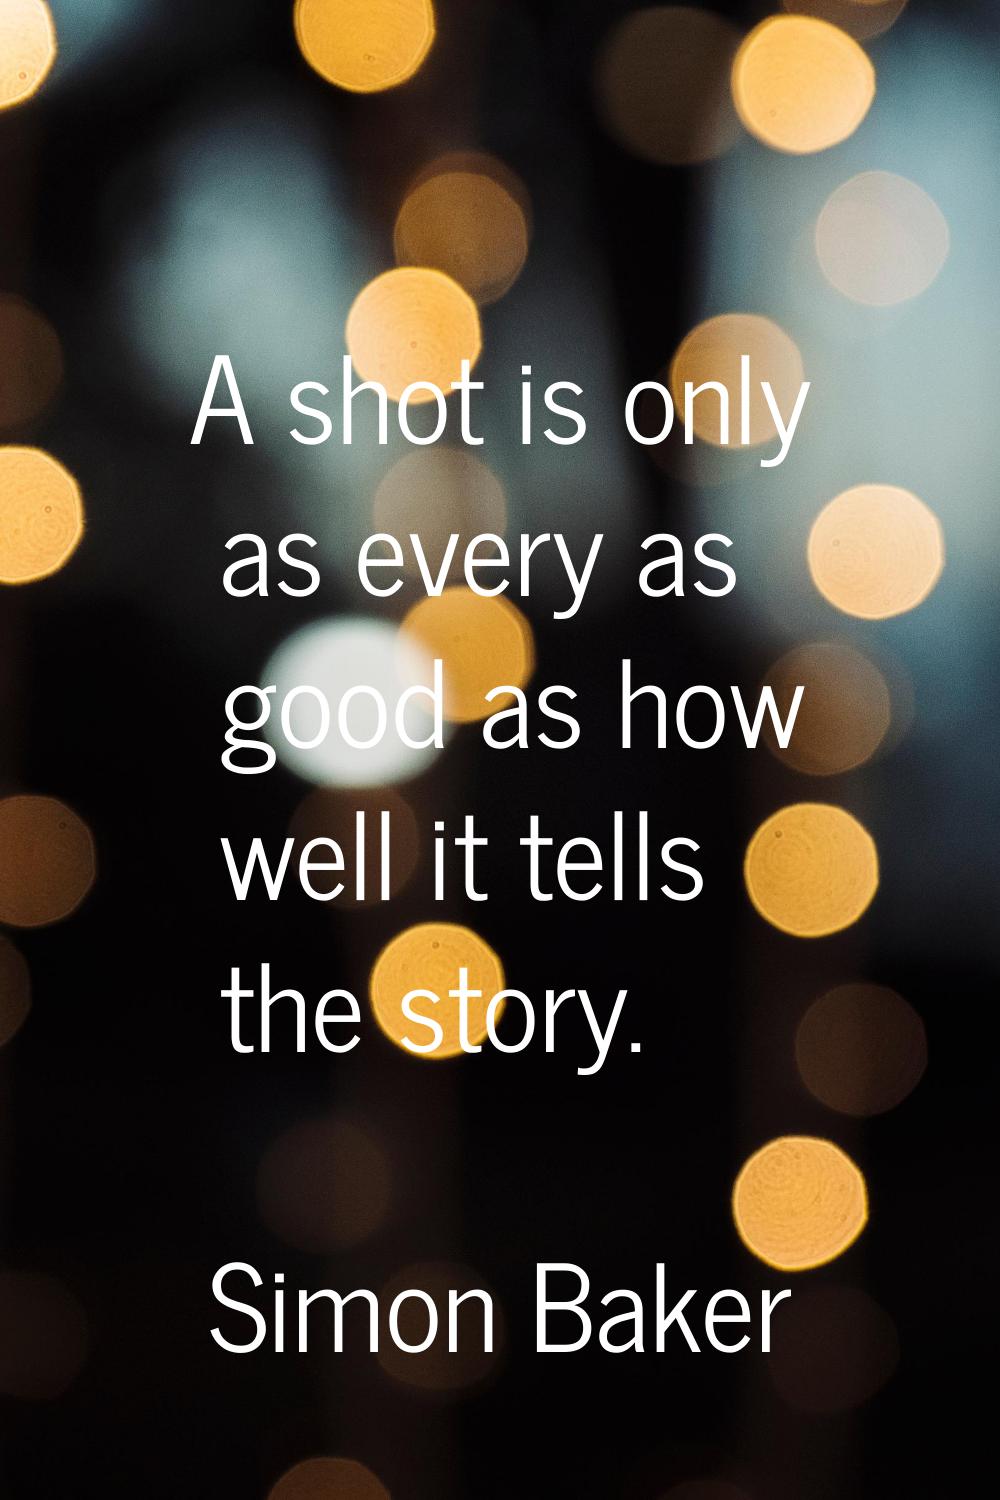 A shot is only as every as good as how well it tells the story.